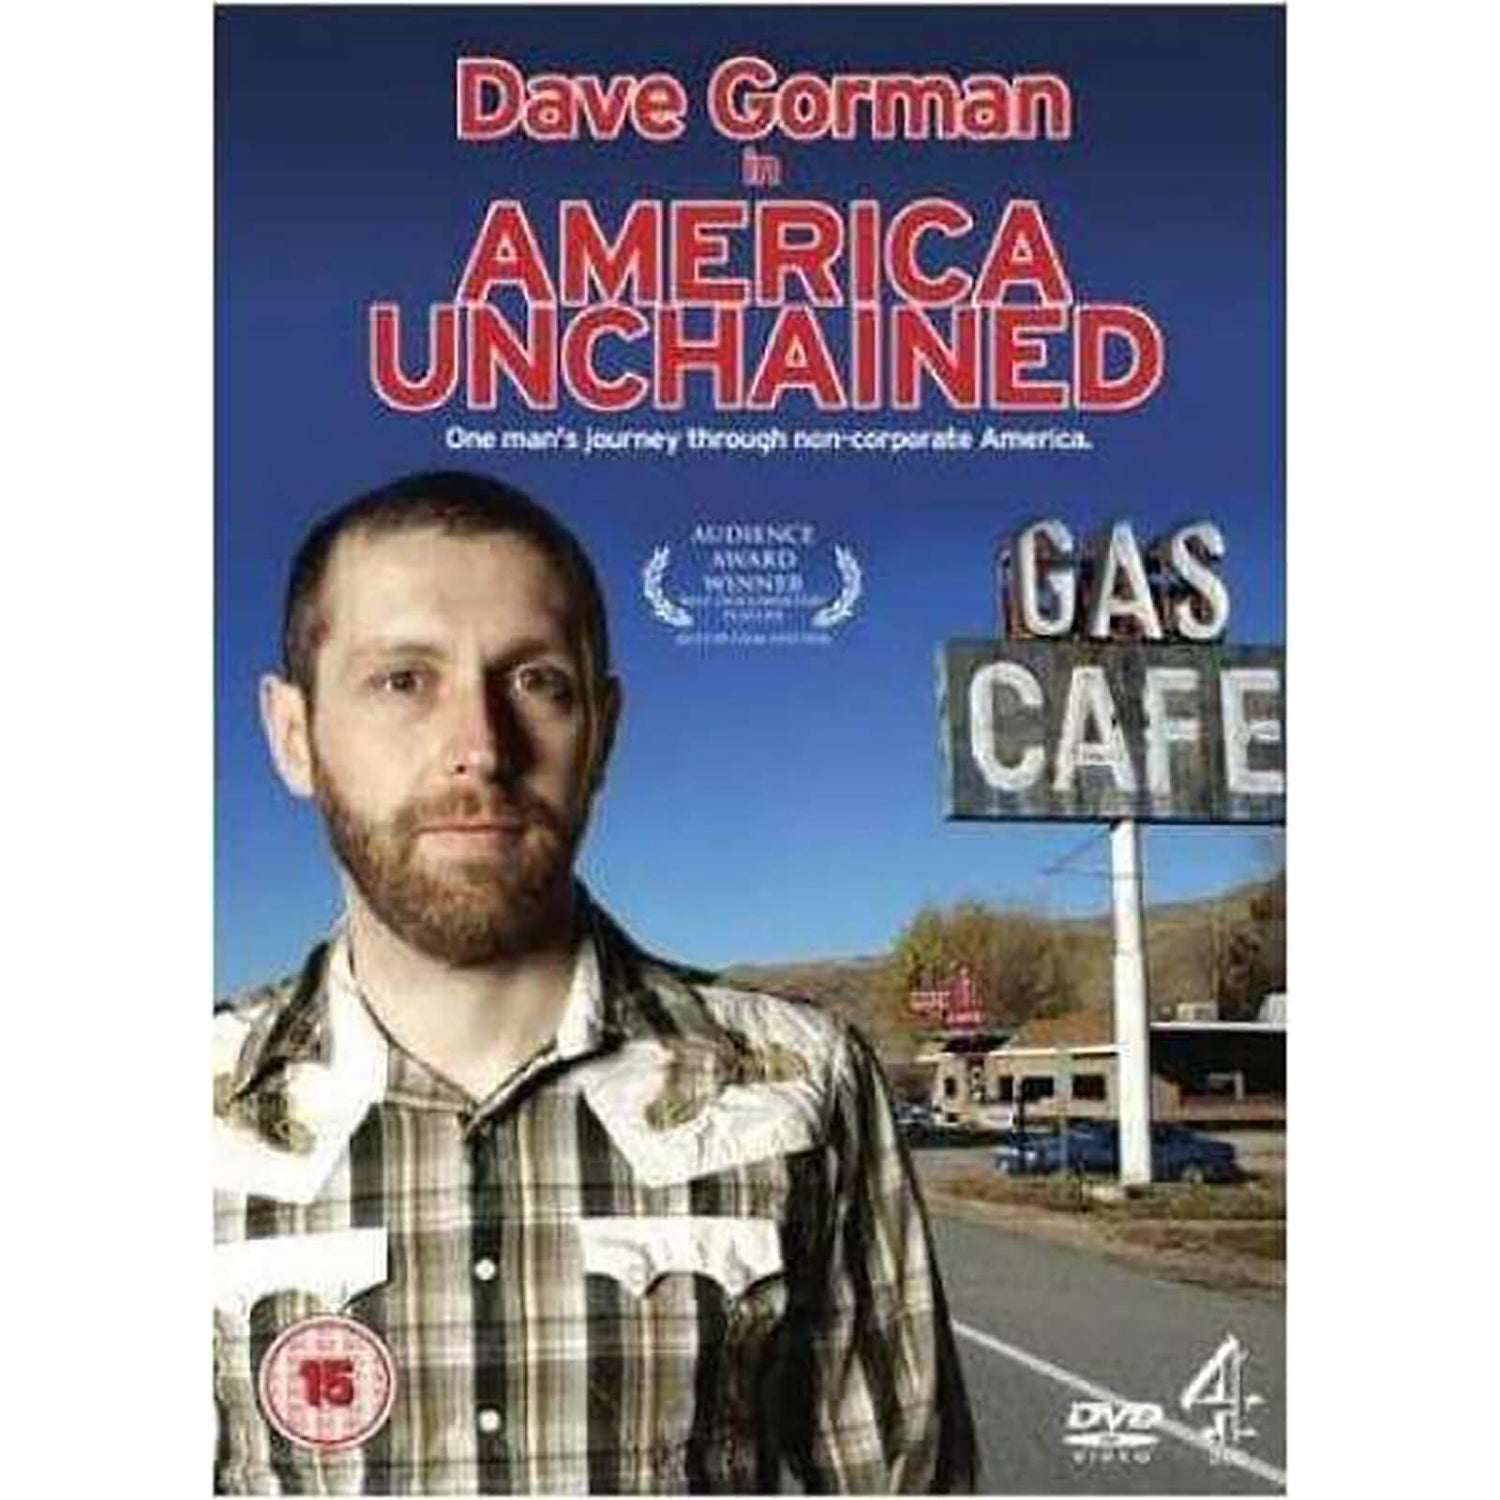 Dave Gorman - America Unchained